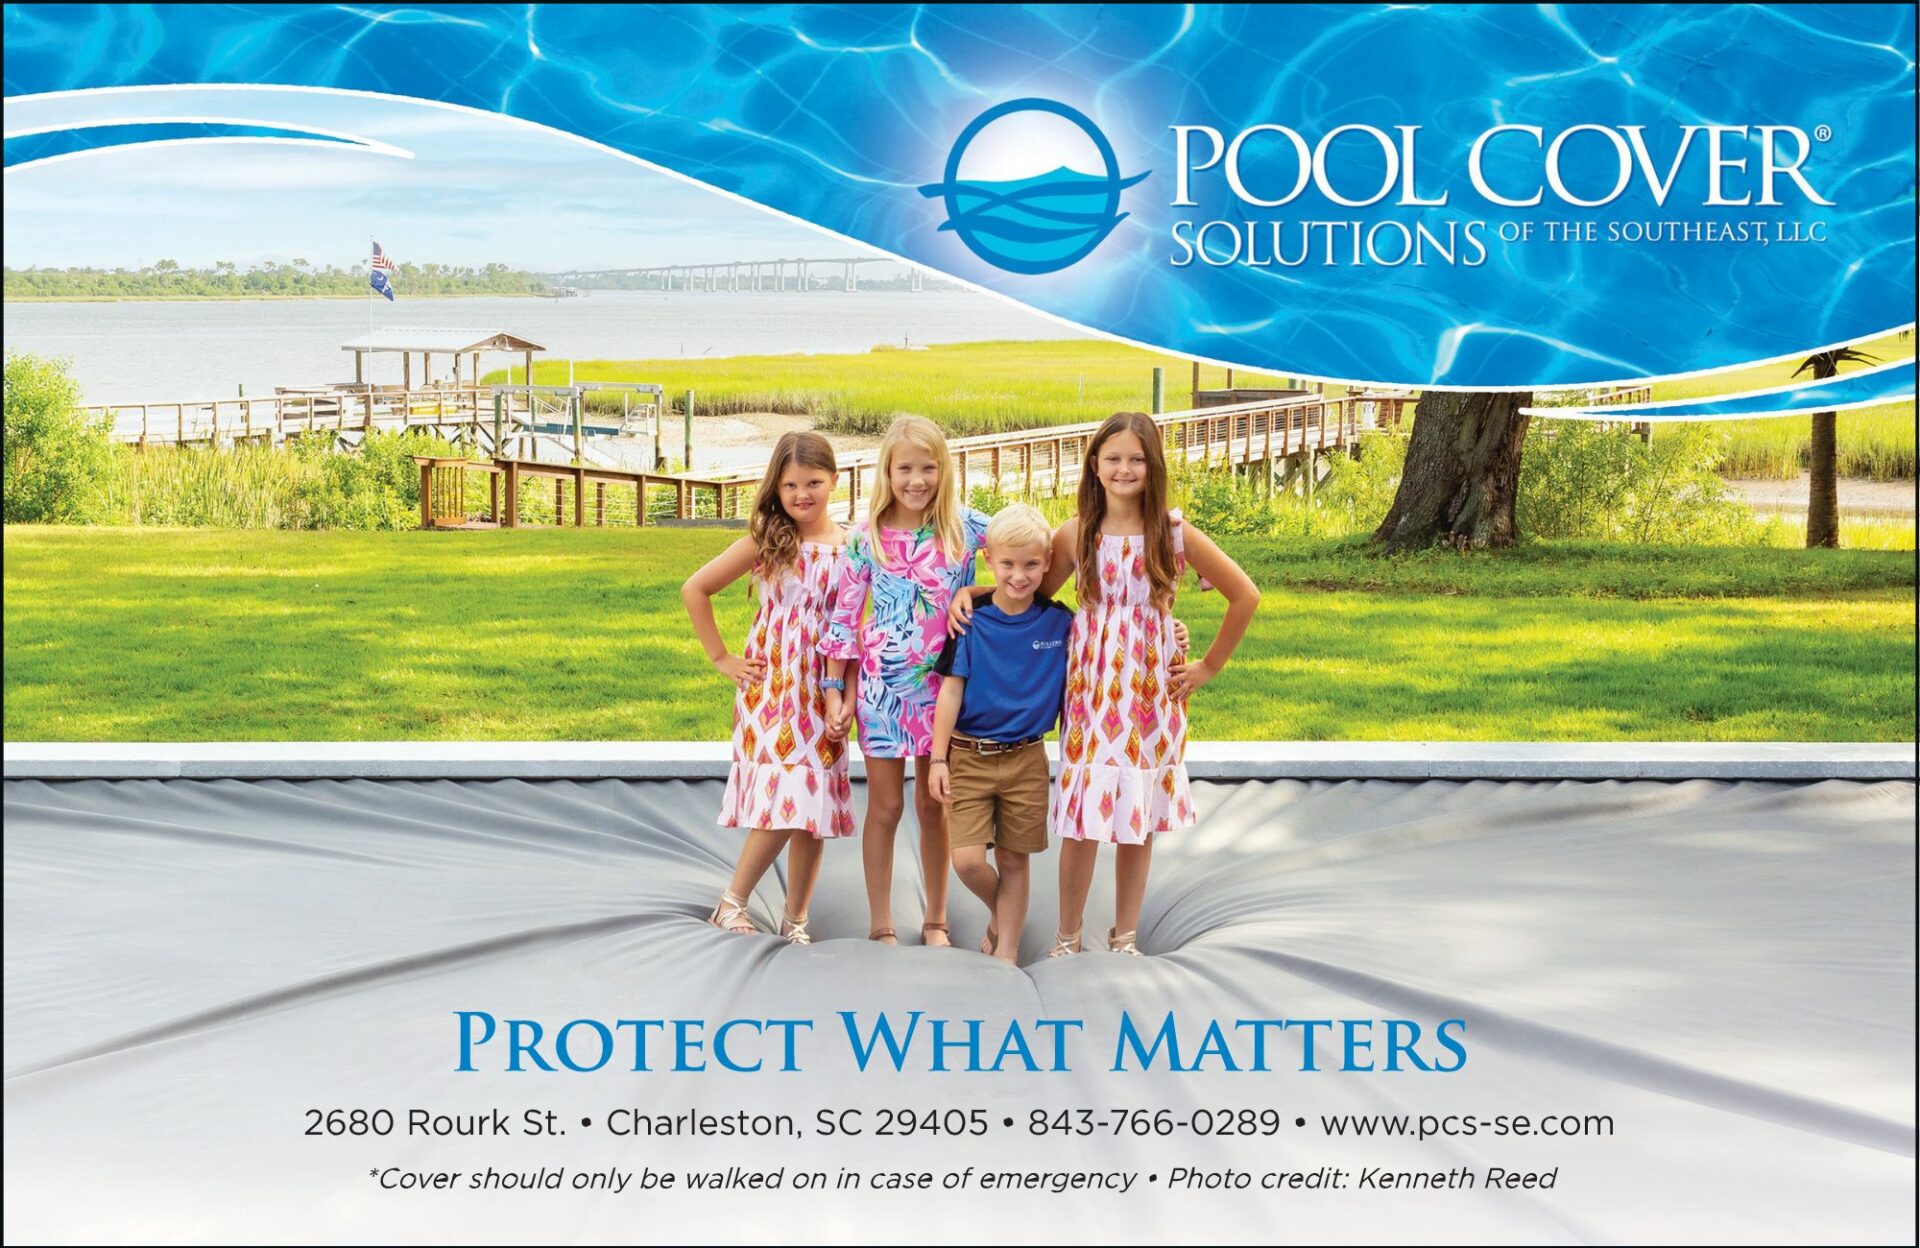 Protect what matters. Four children stand barefooted on an automatic safety pool cover.